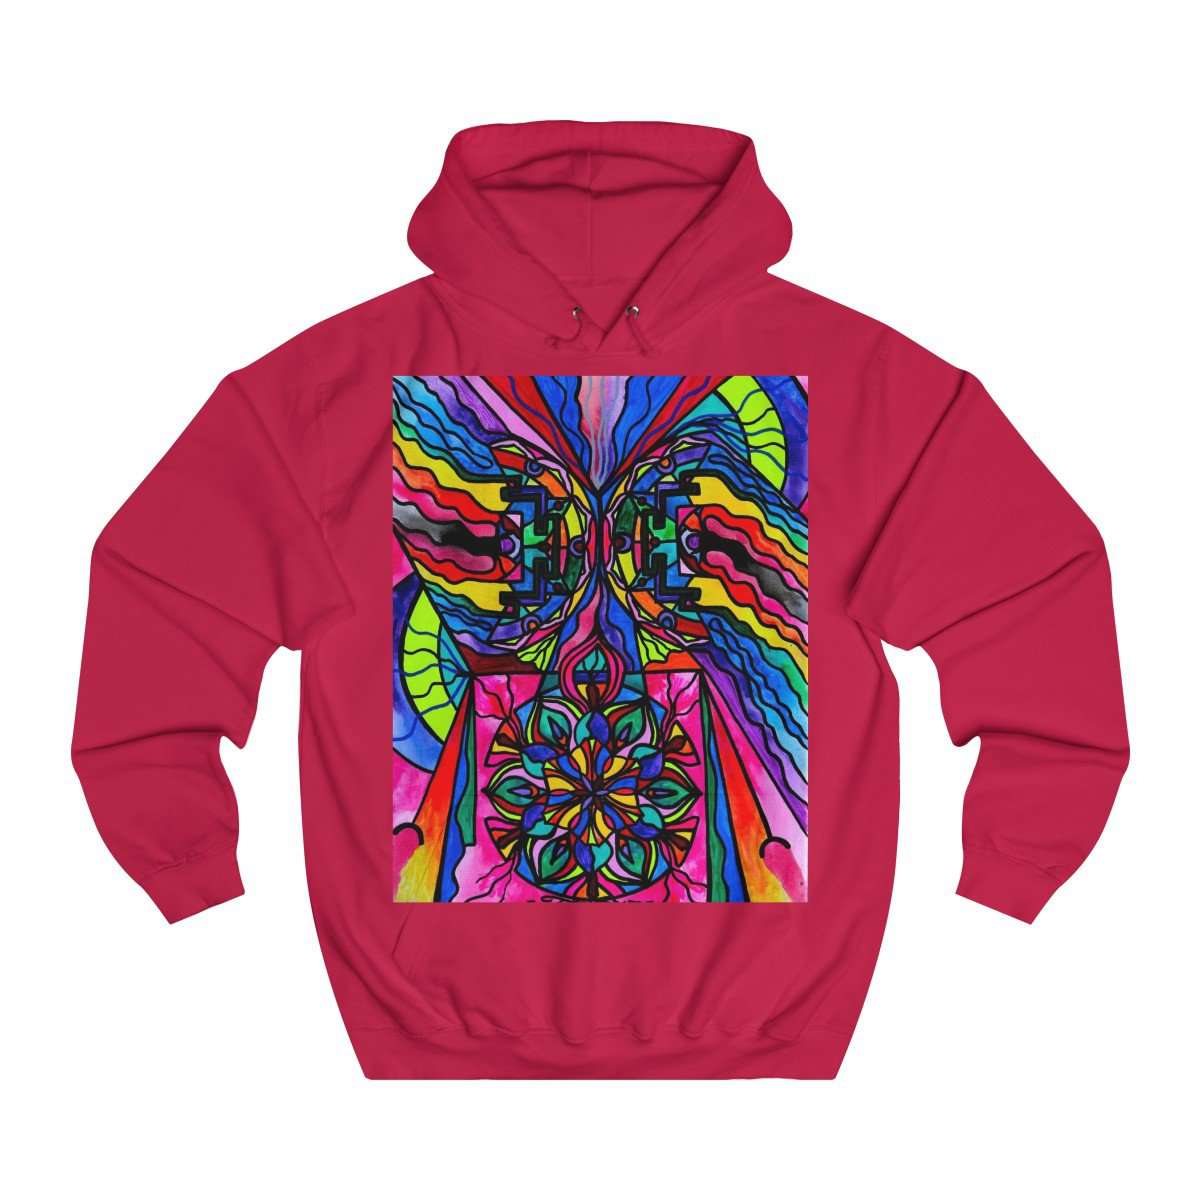 shop-for-non-attachment-unisex-college-hoodie-hot-on-sale_14.jpg